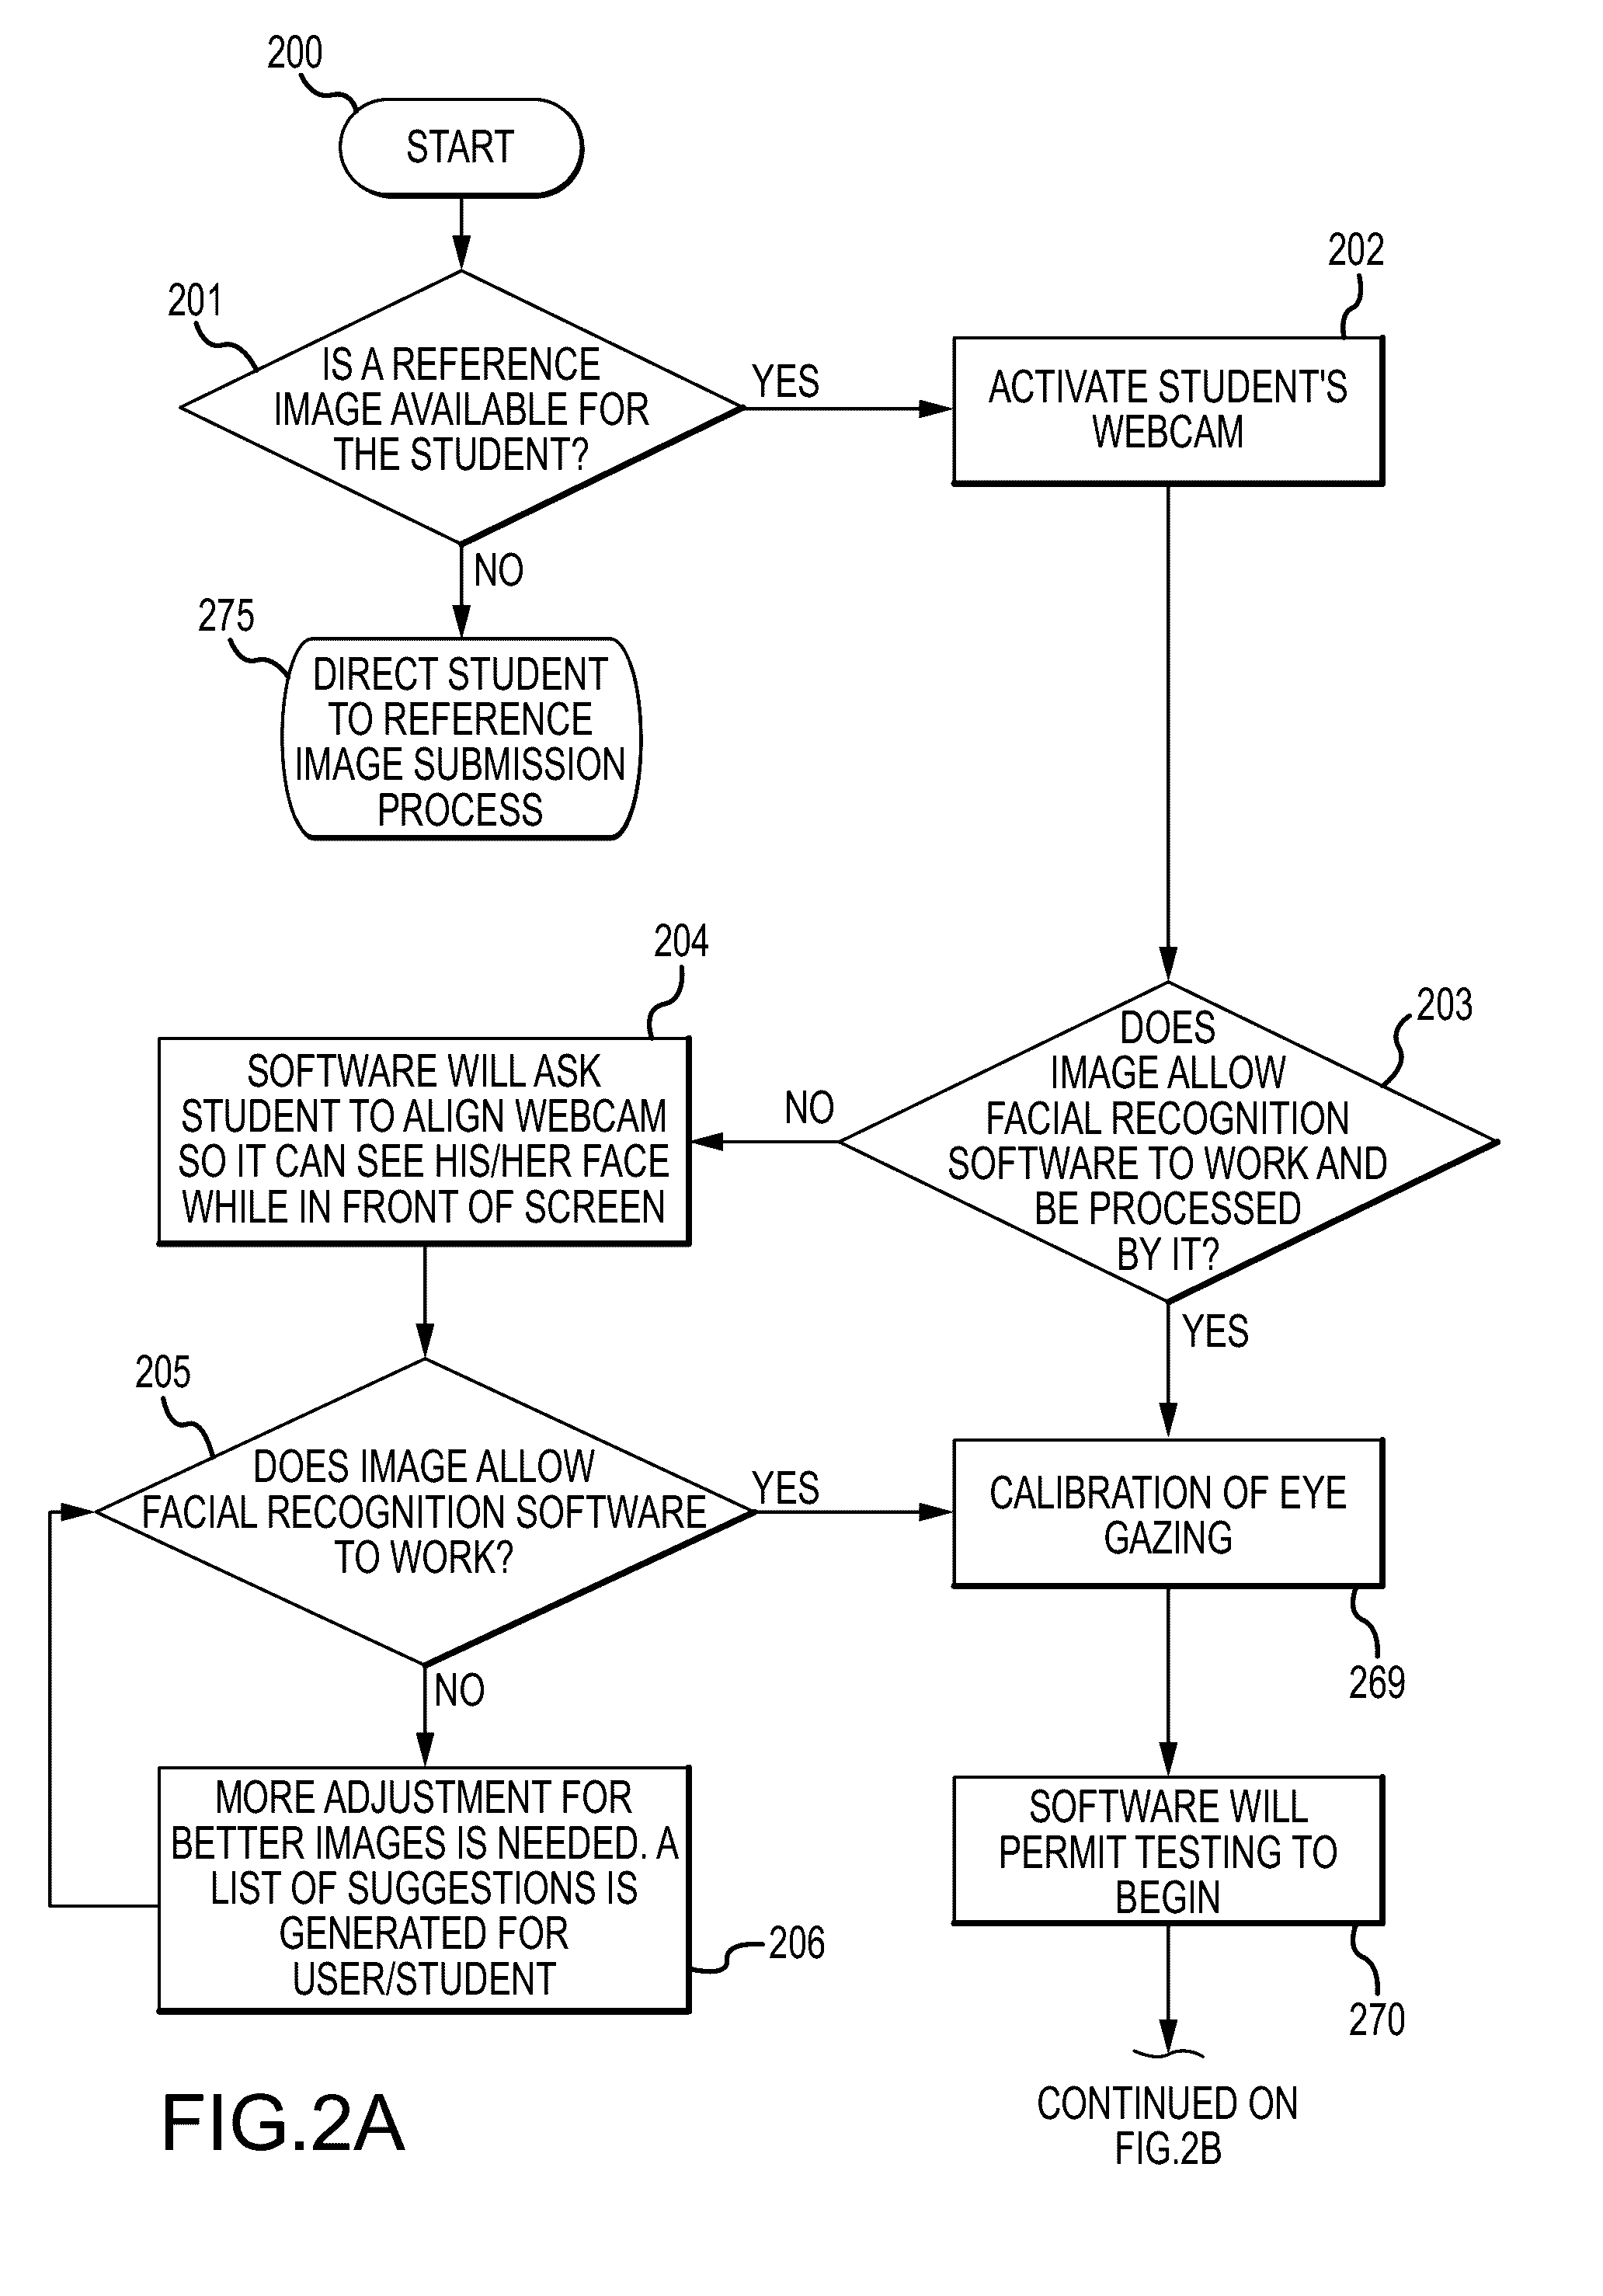 System and method for validating honest test taking